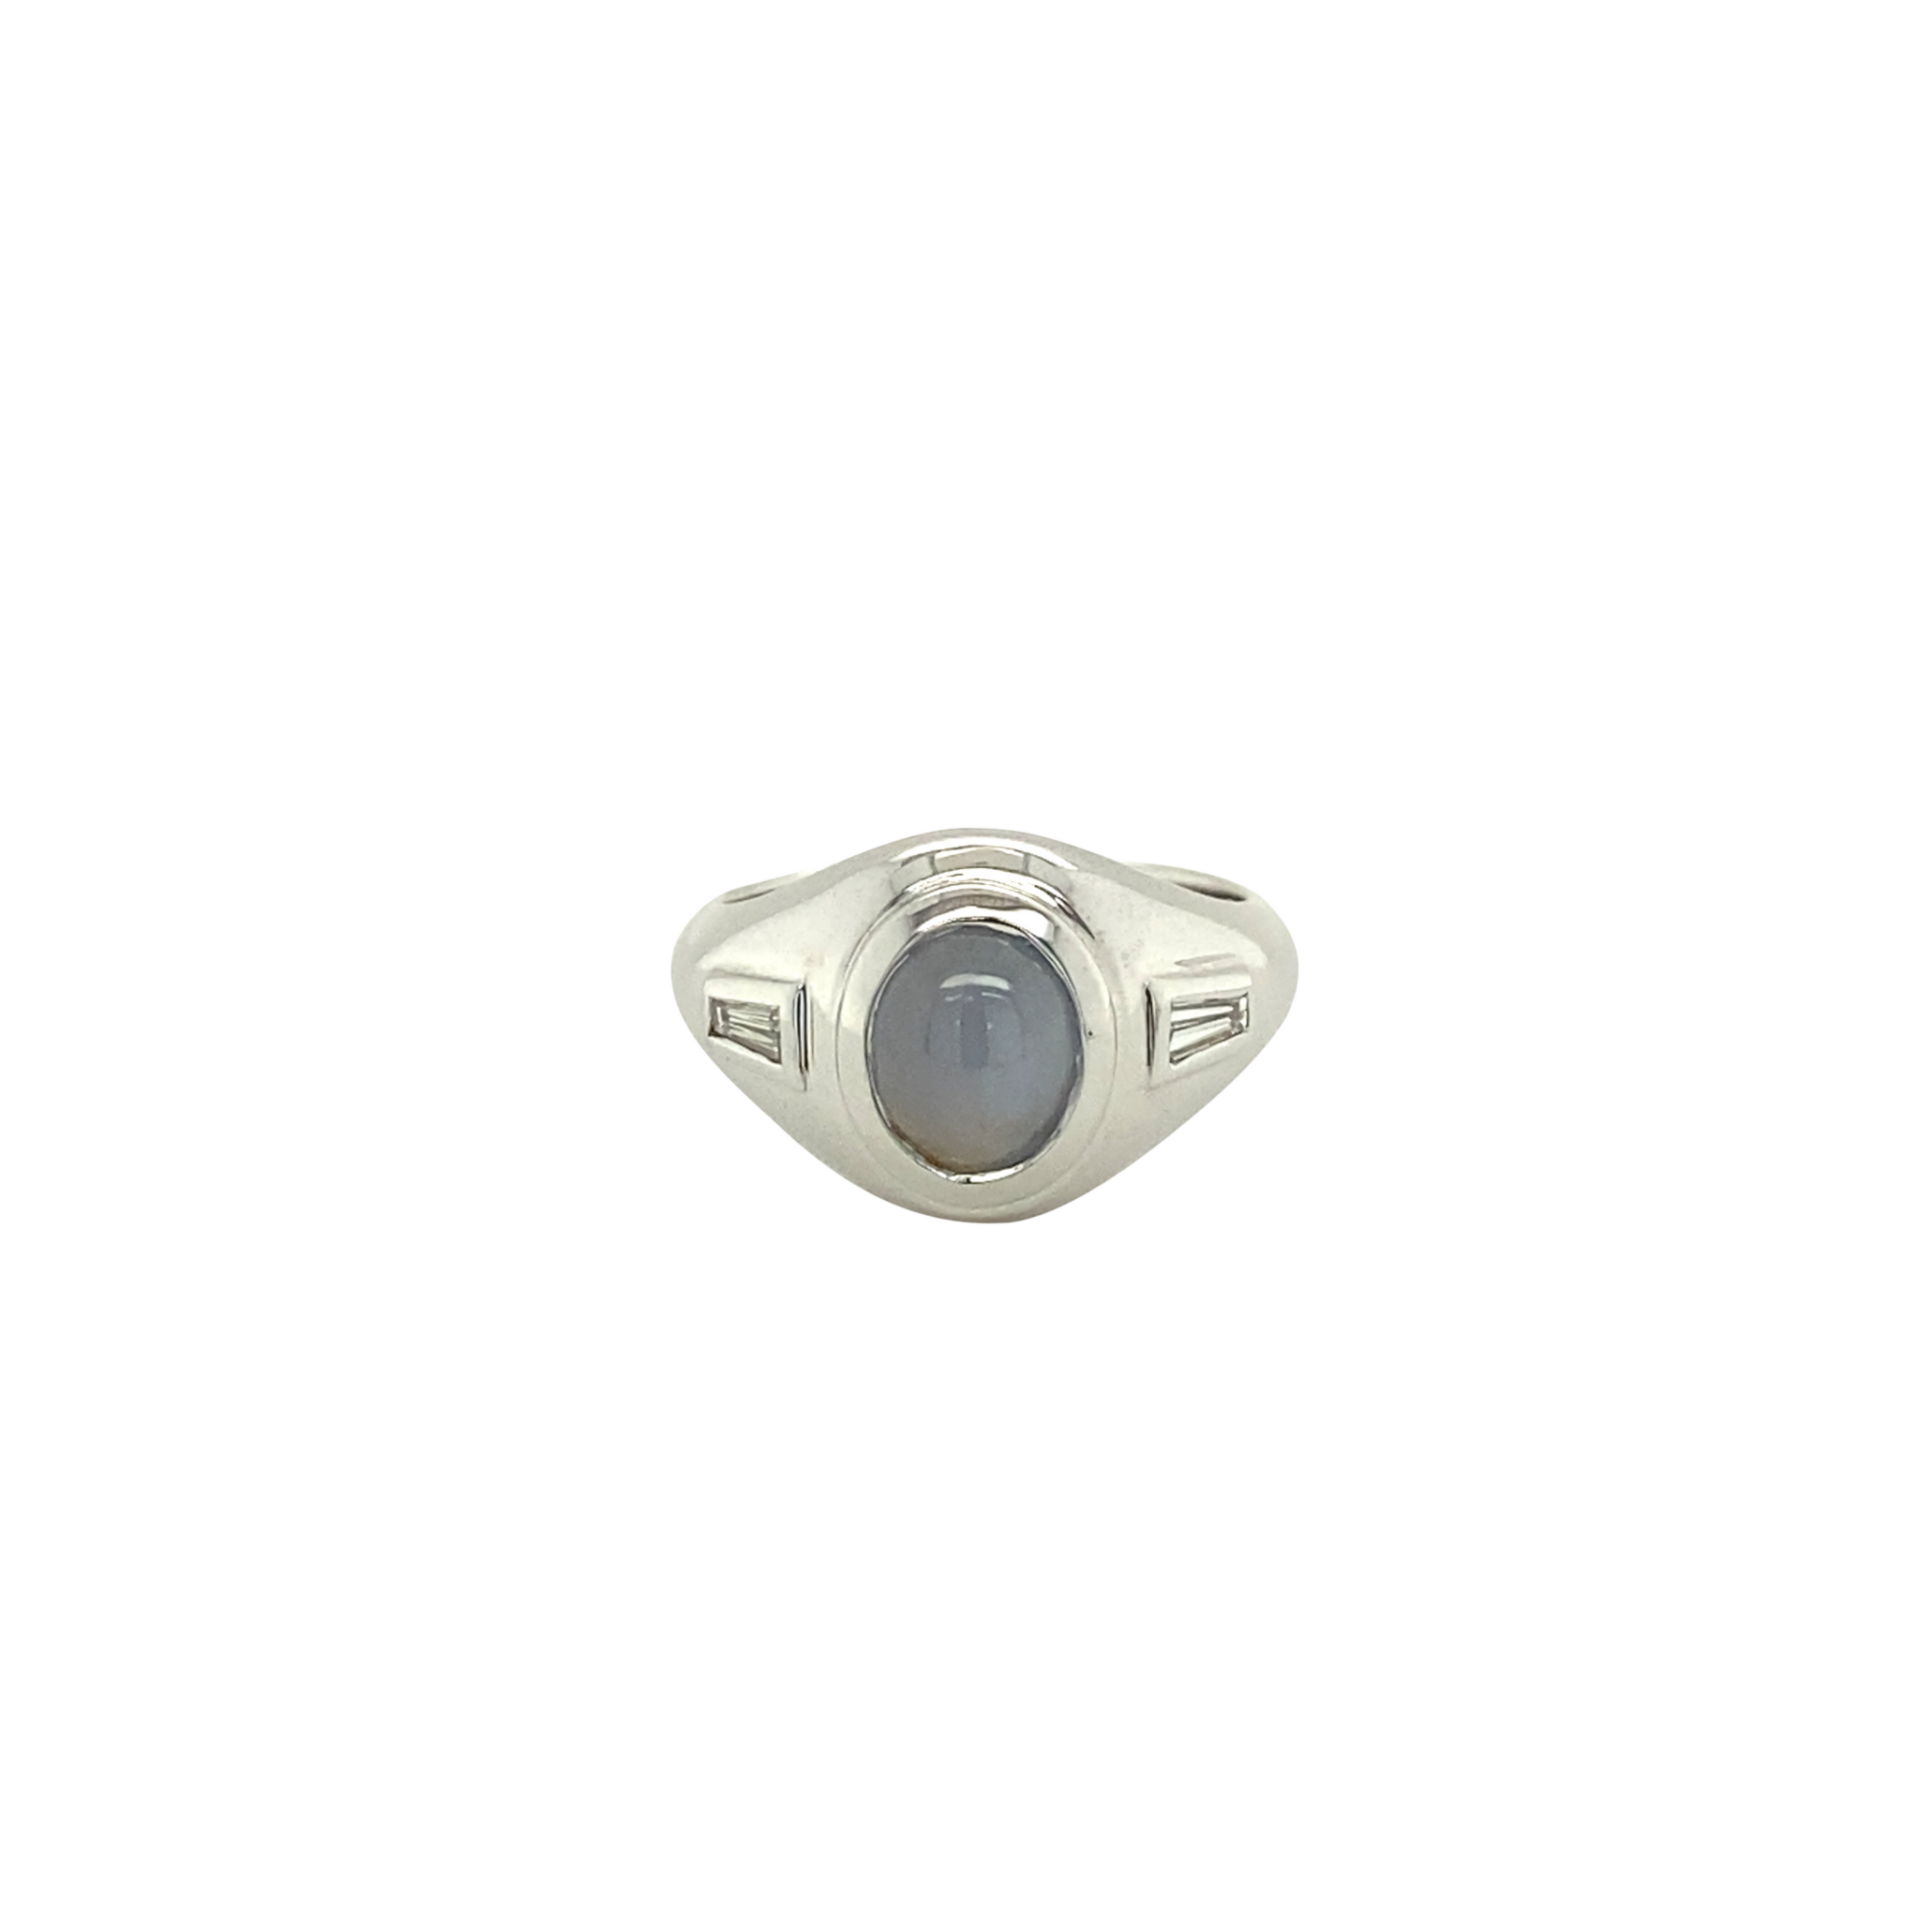 Cabochon Oval Sapphire Ring - Vardys Jewelers Bay Area